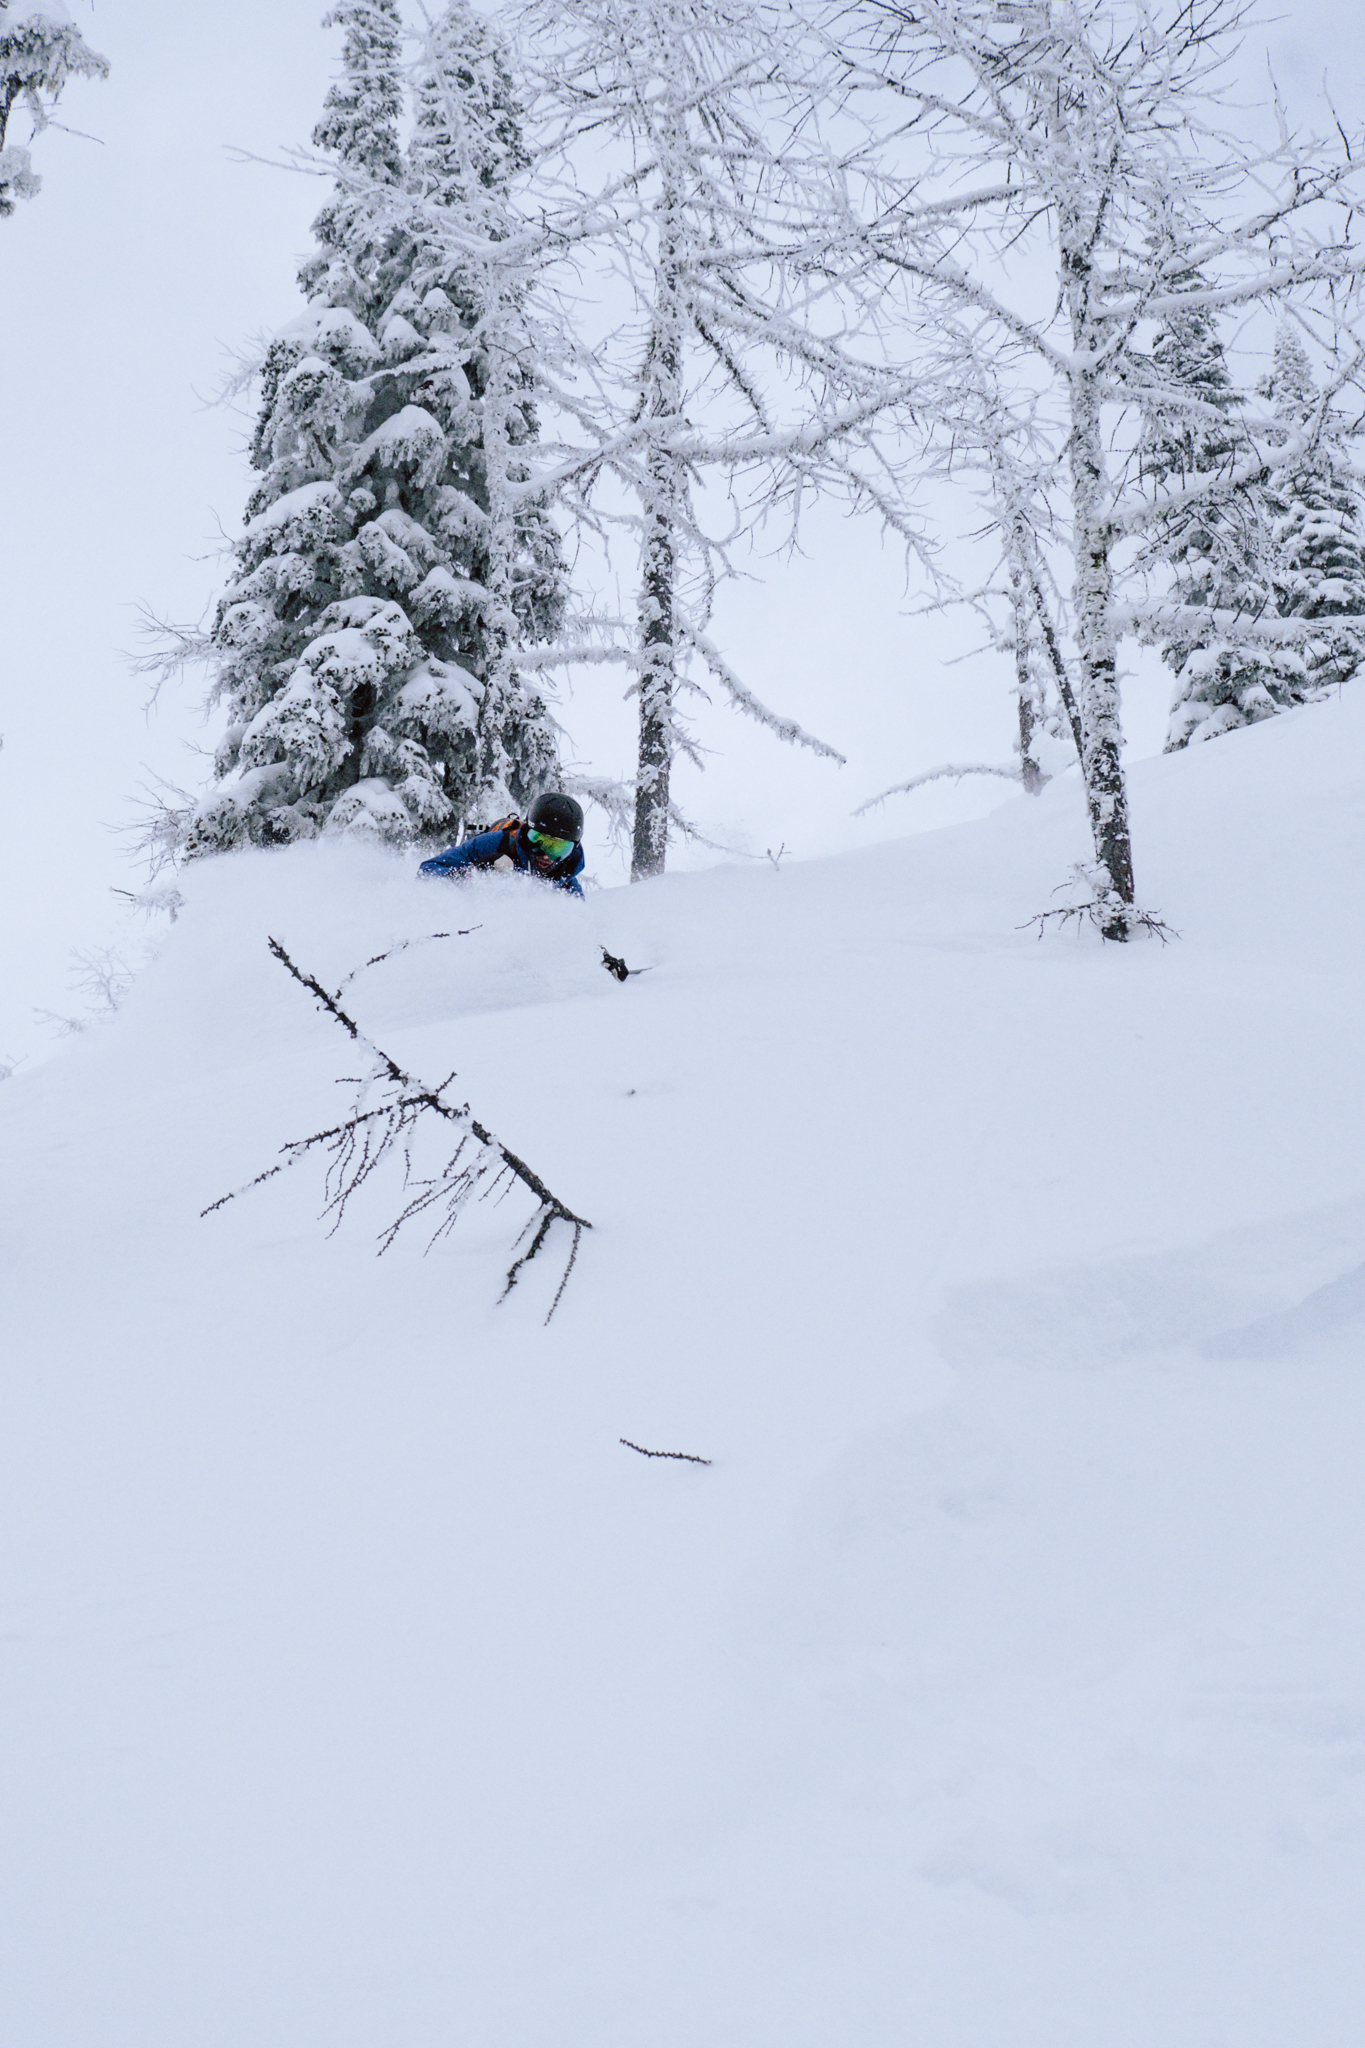 Untouched turns in the backcountry.